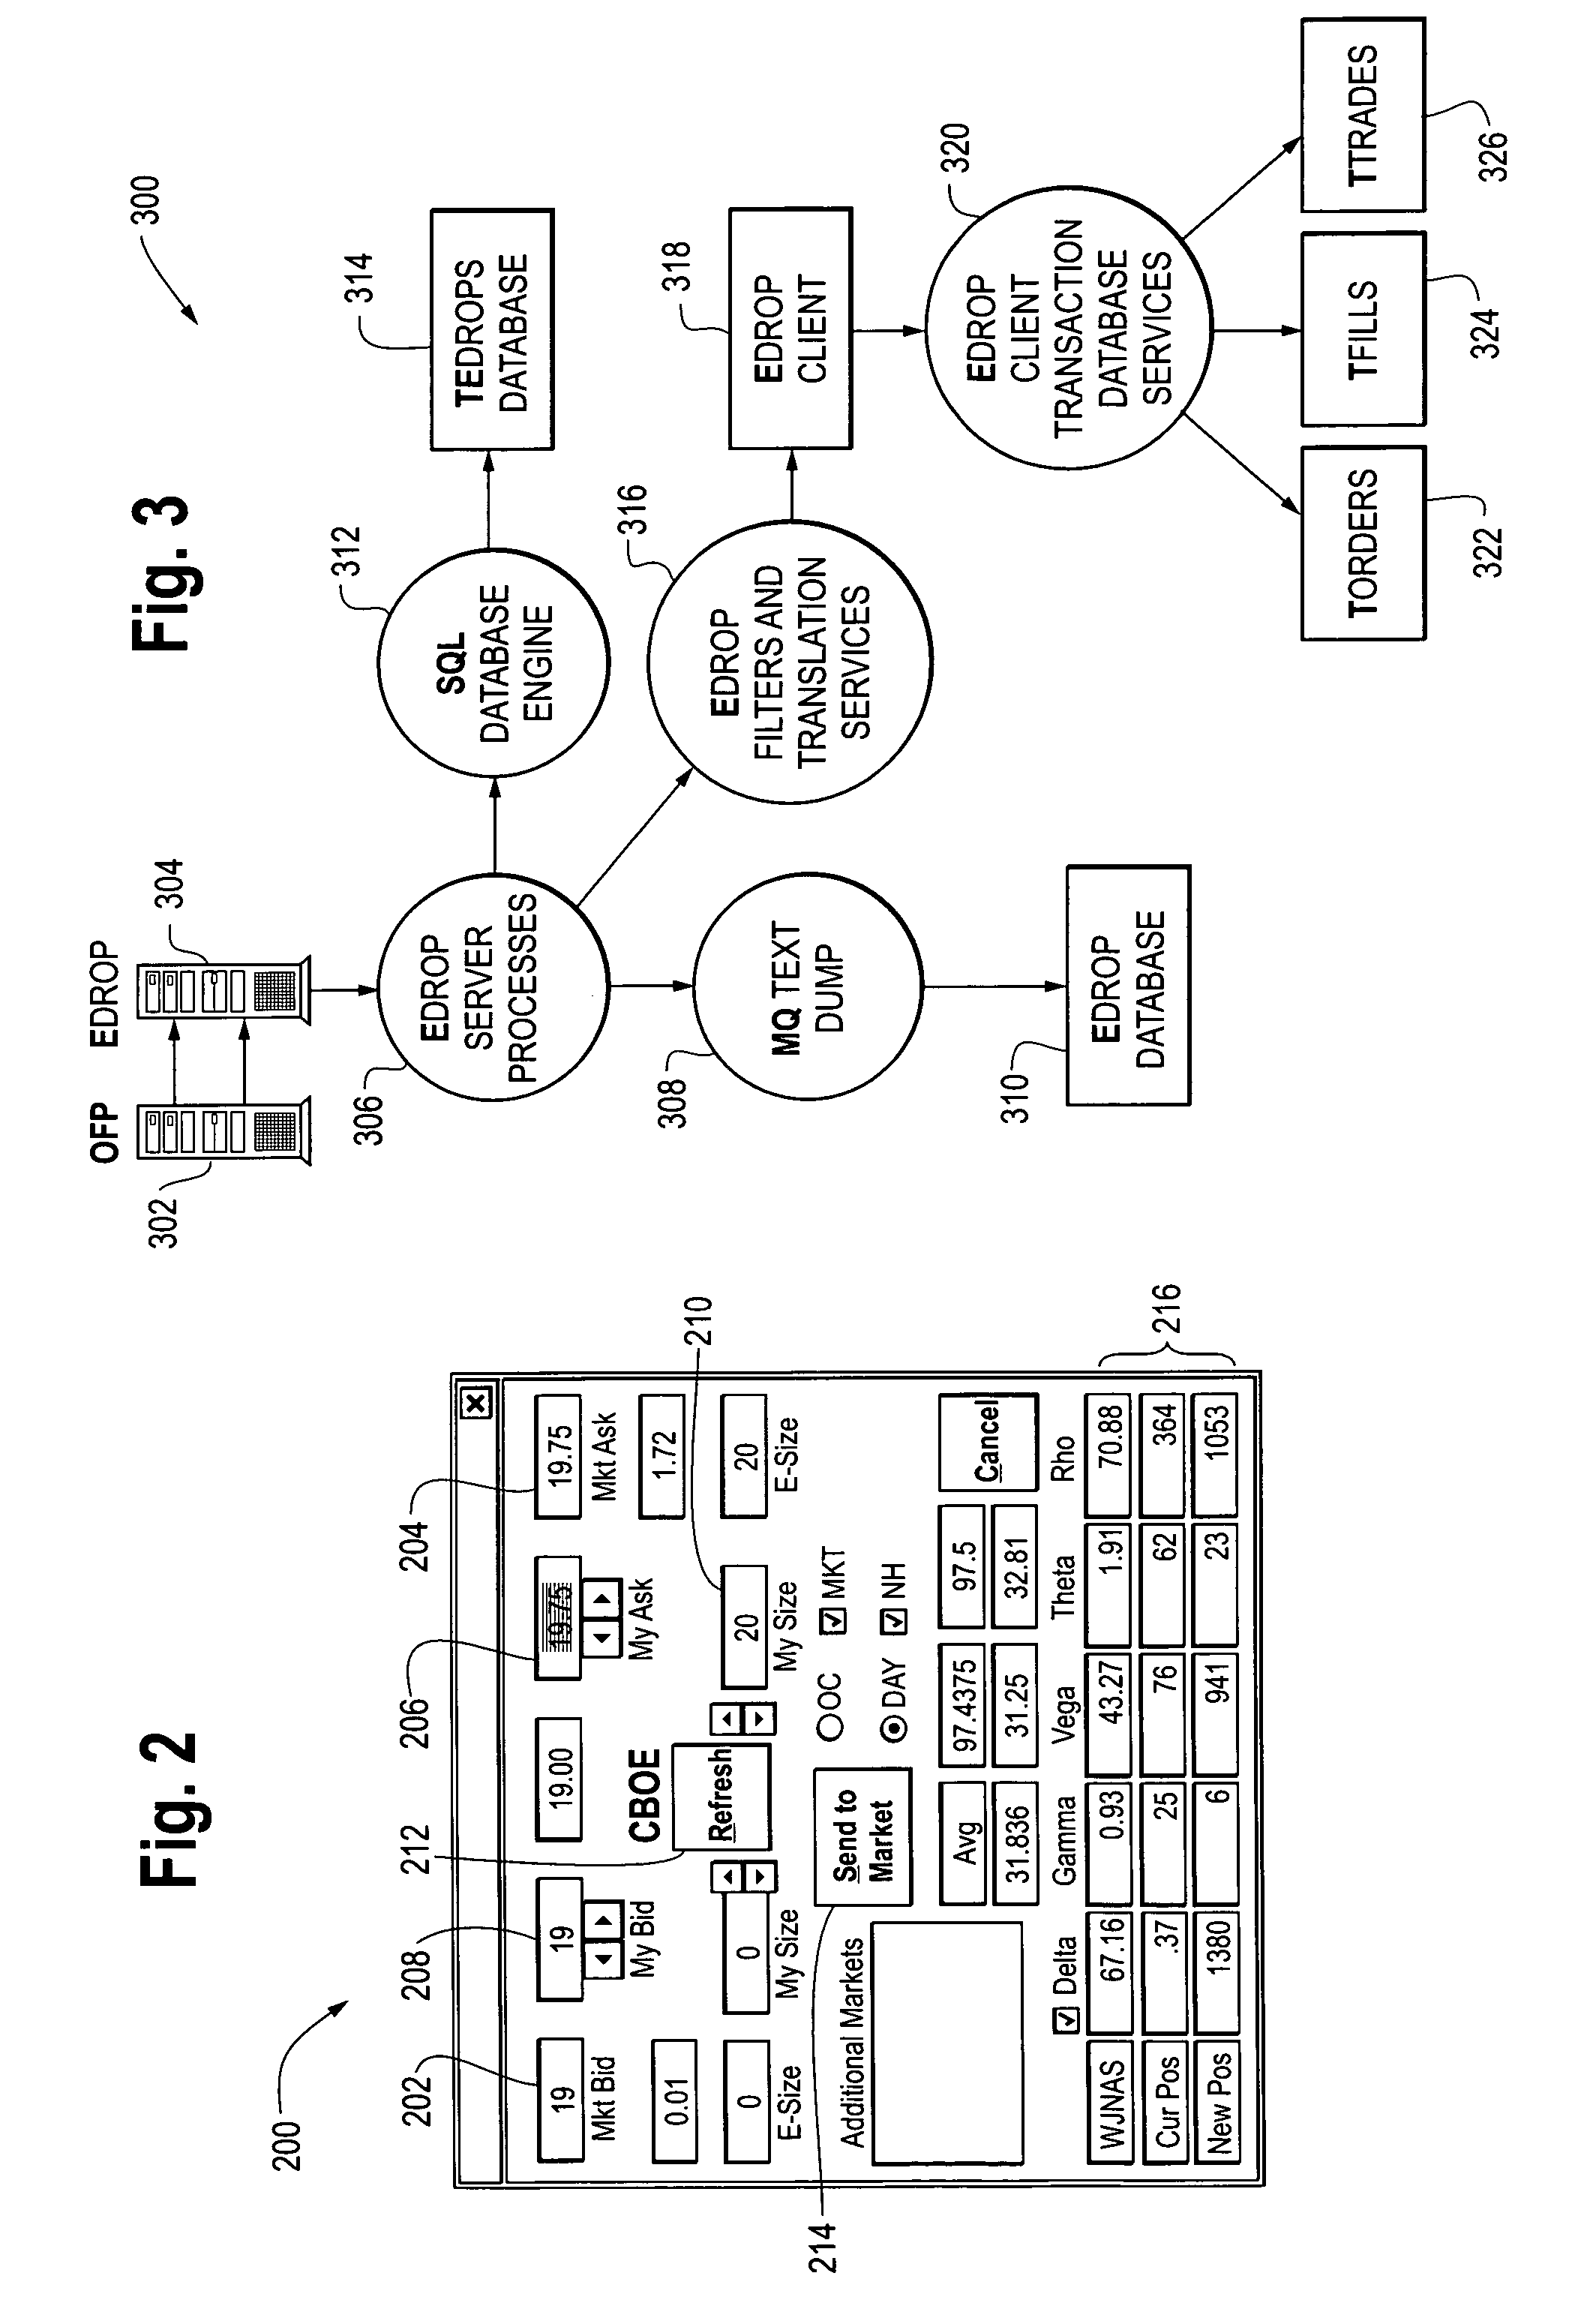 Method and apparatus for stock and index option price improvement, participation, and internalization